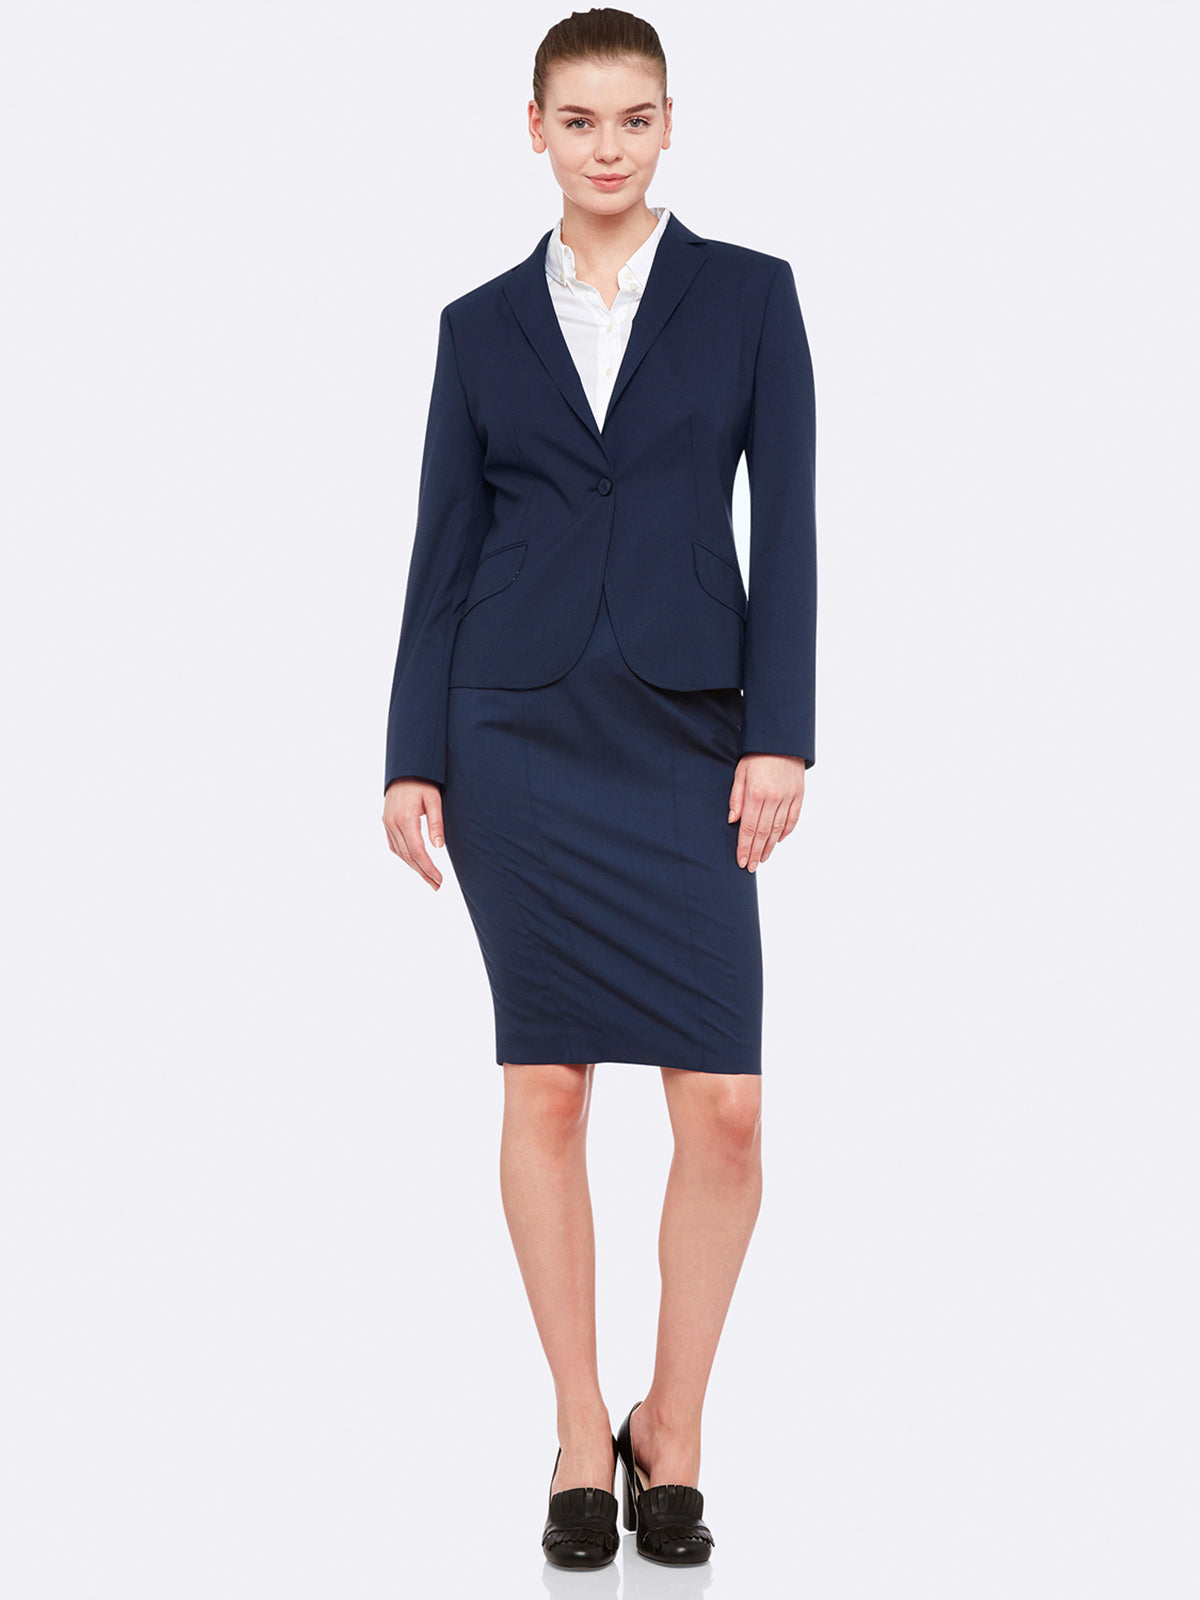 Womens Suits Blazers Formal Women Skirt Suits Ladies Business Clothes Navy  Blue Blazer And Jacket Office Uniform Styles 230316 From Kong01, $33.58 |  DHgate.Com